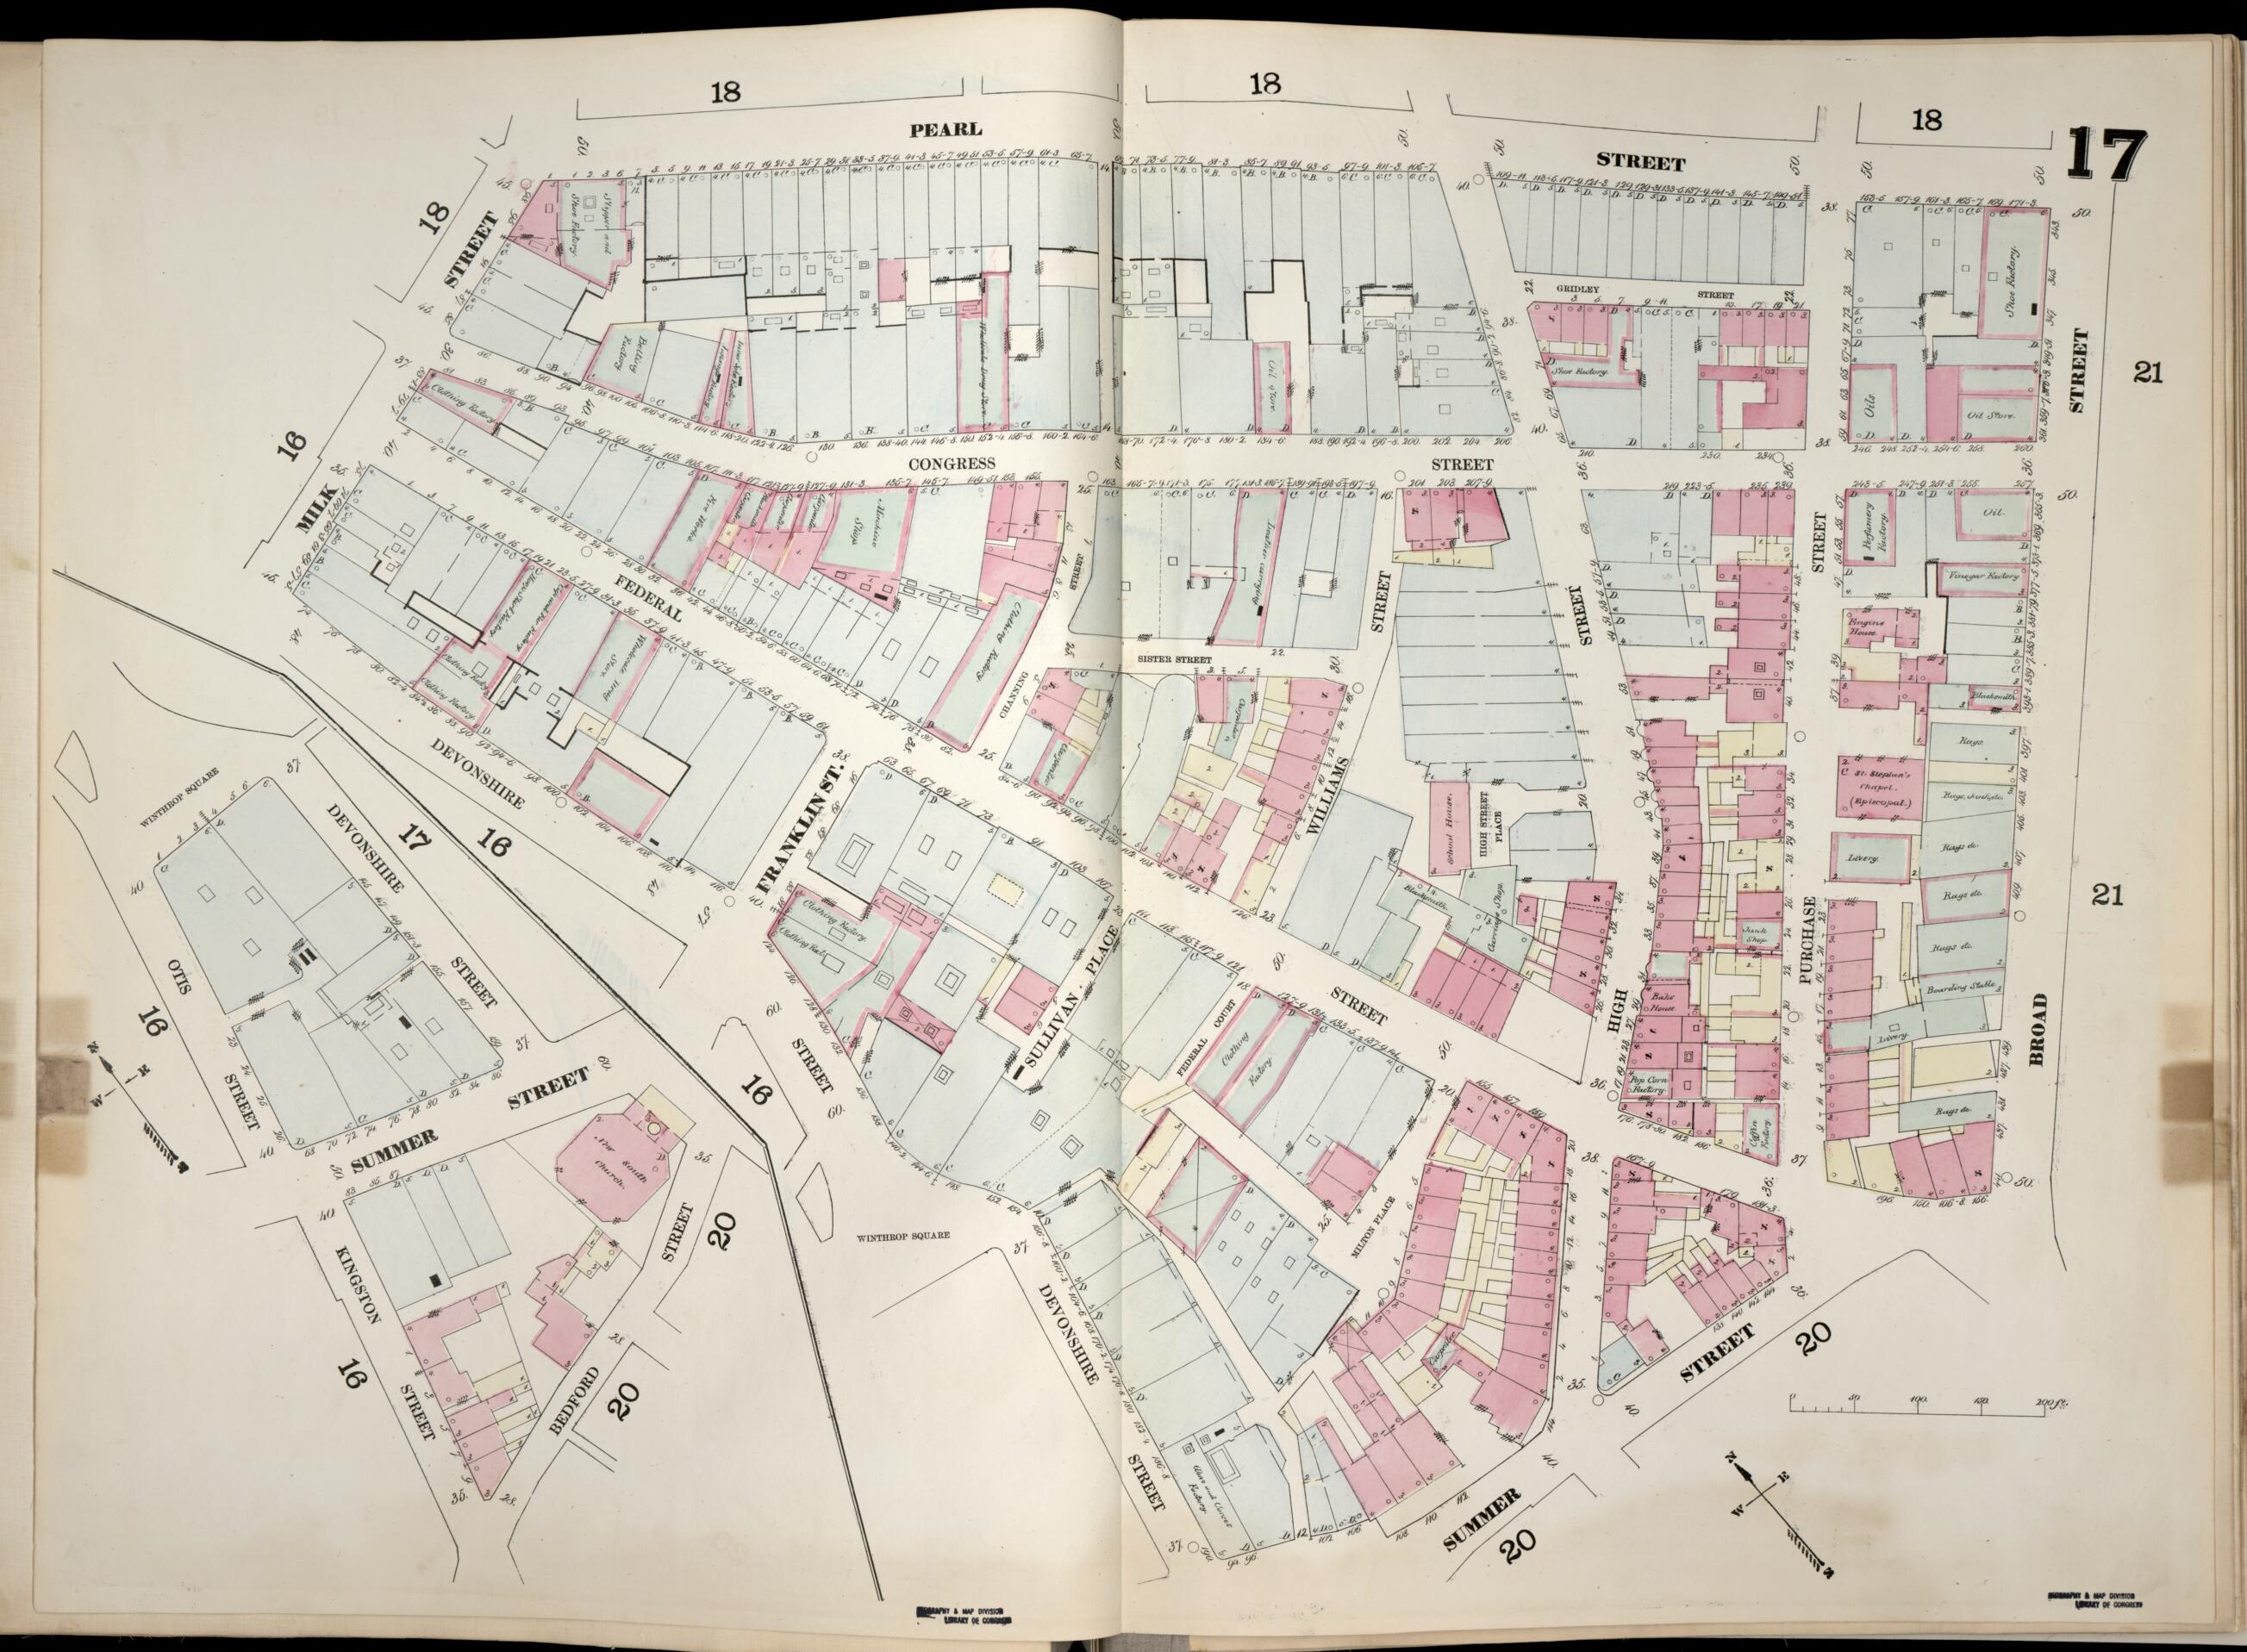 This old map of Image 18 of Boston from Insurance Map of Boston. Volume 1 from 1867 was created by D. A. (Daniel Alfred) Sanborn in 1867